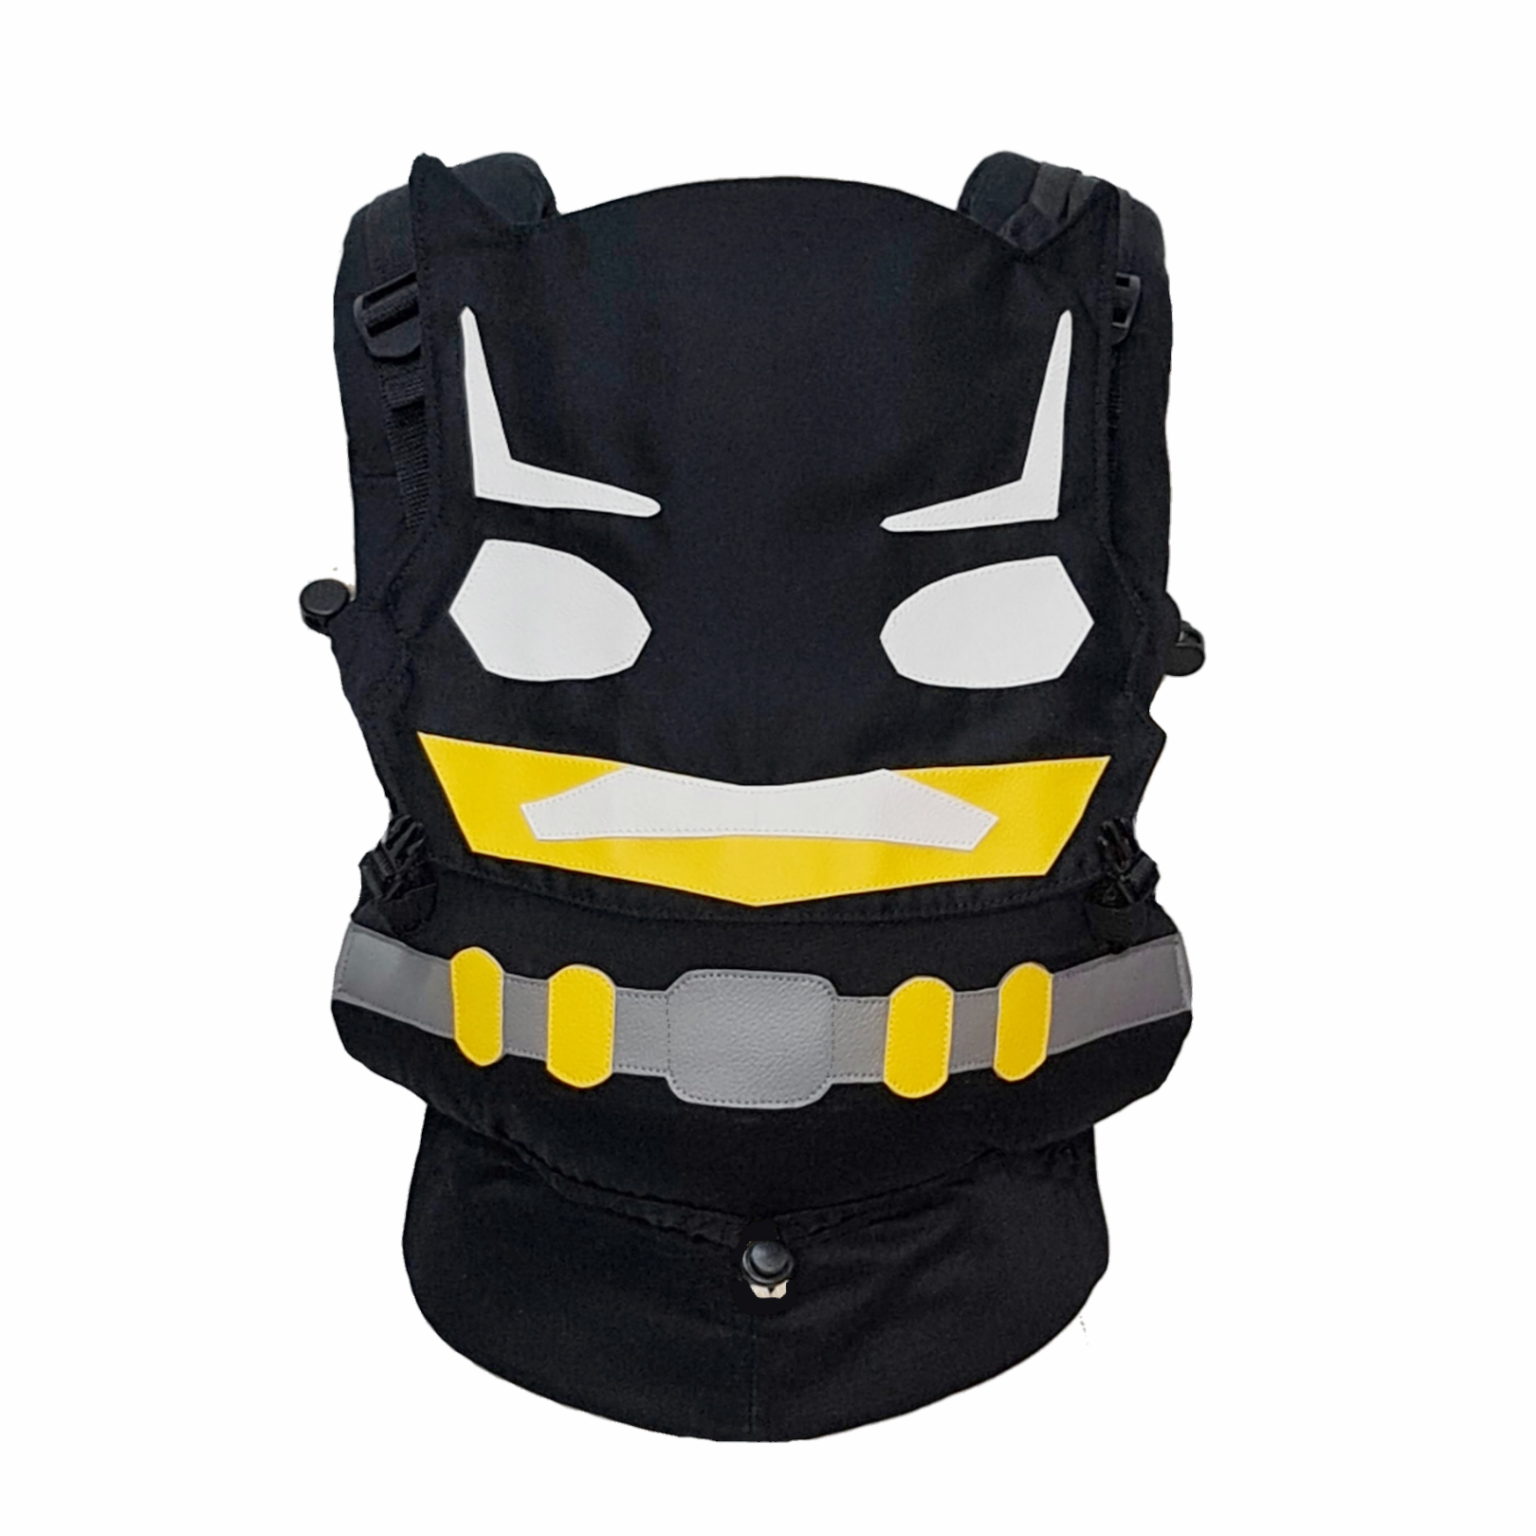 Baby carrier, soft structured carrier, batman baby carrier